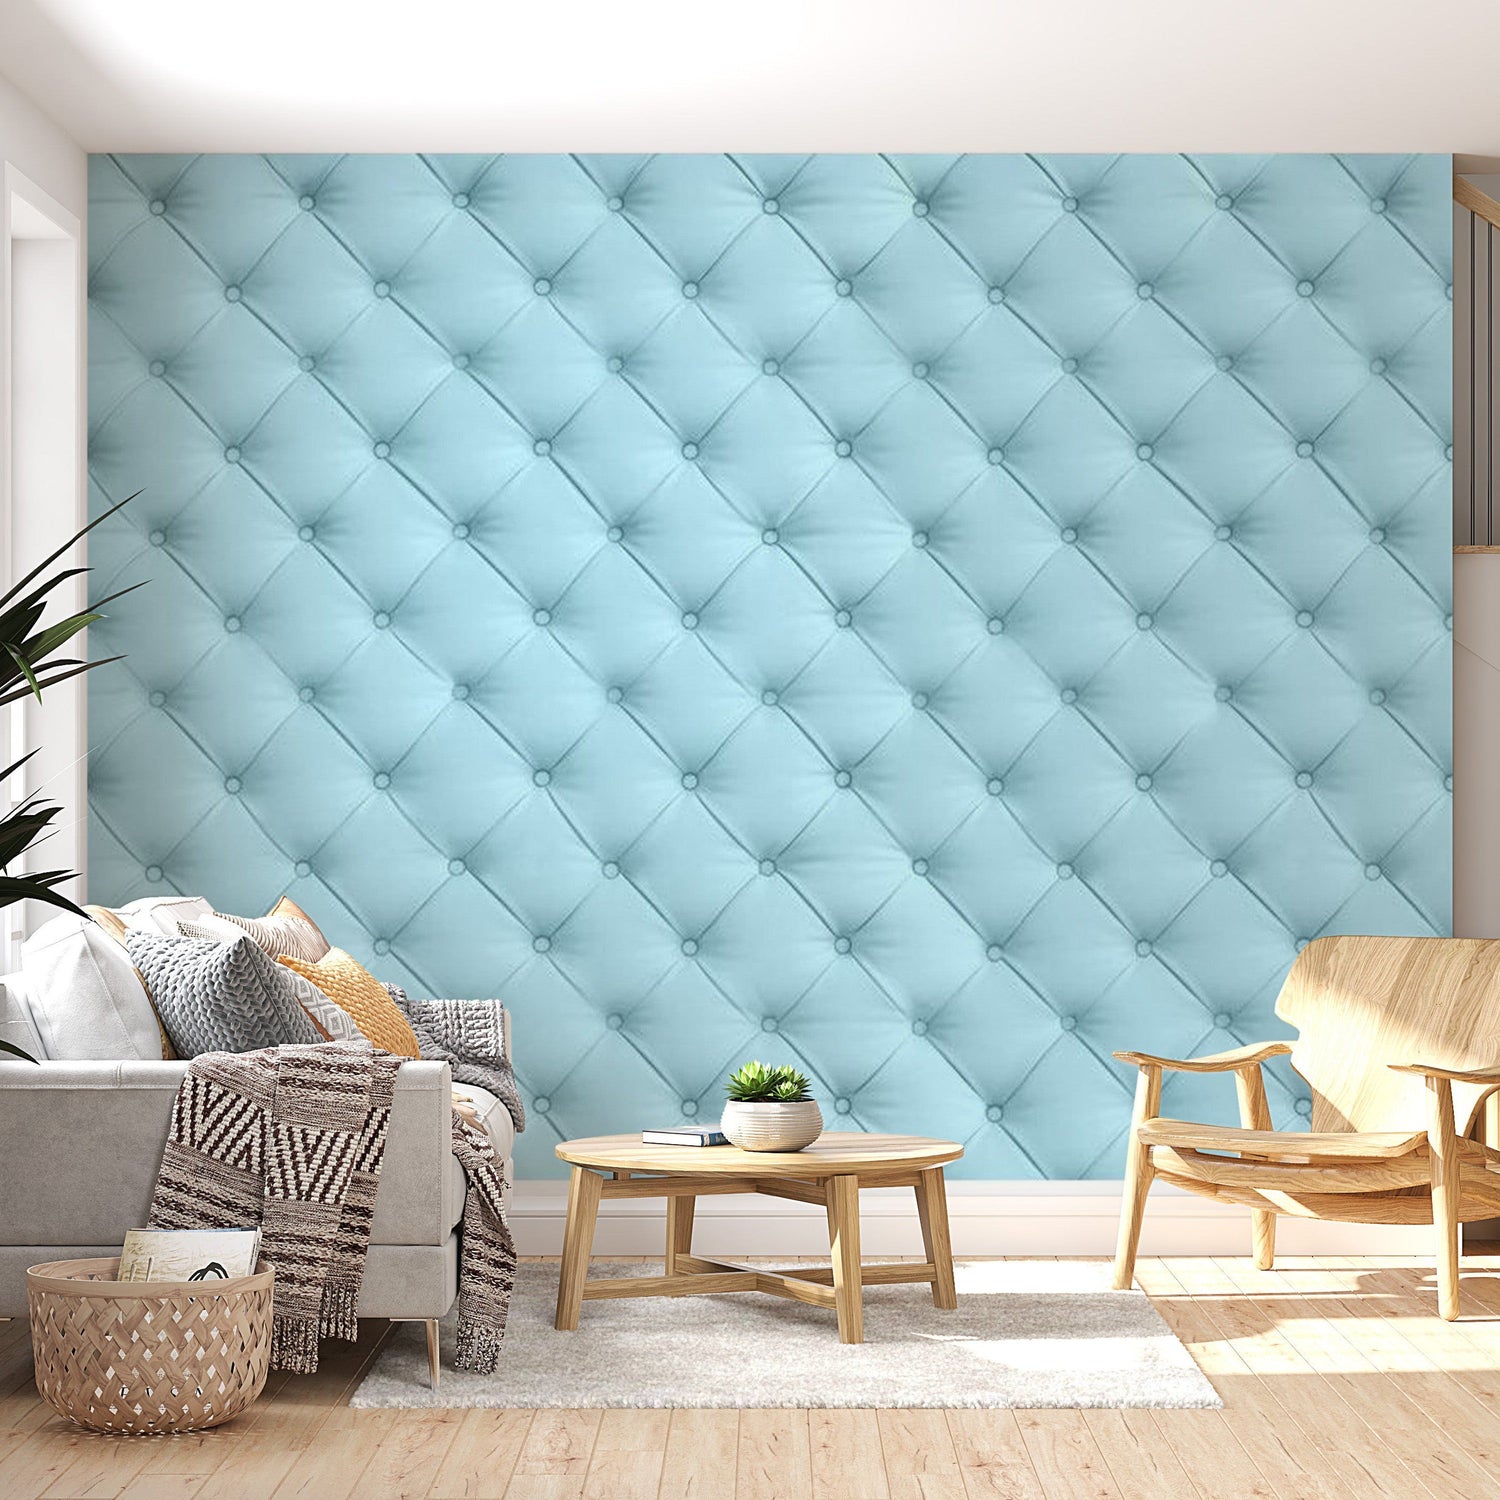 Peel & Stick Wall Mural - Baby Blue Chesterfield Pattern - Removable Wall Decals